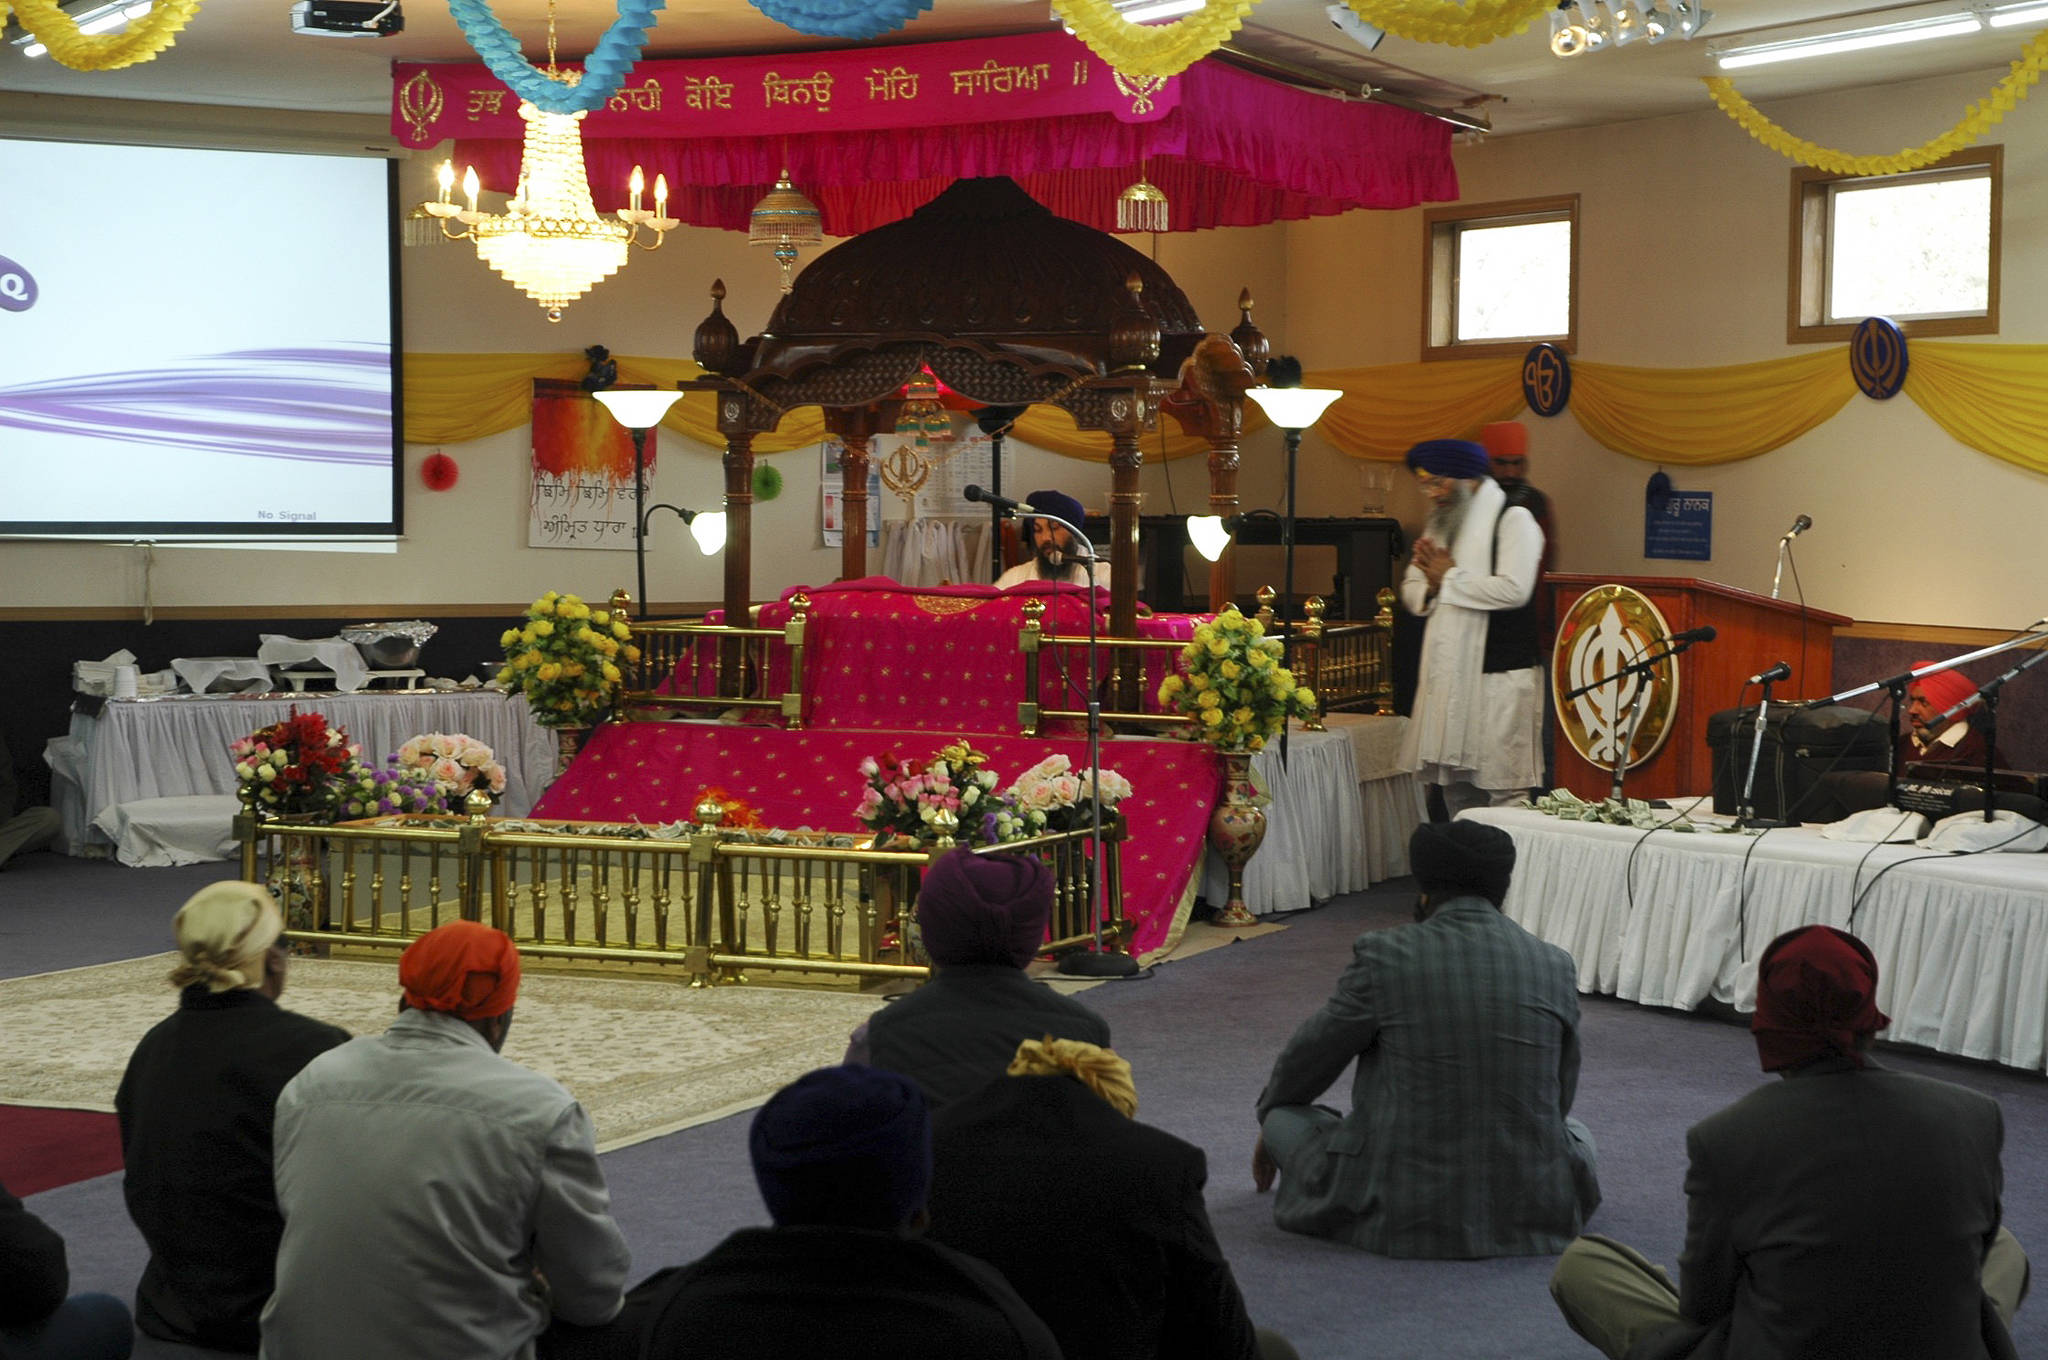 Testing faith: Sikh Temple in Marysville stays true to its teachings